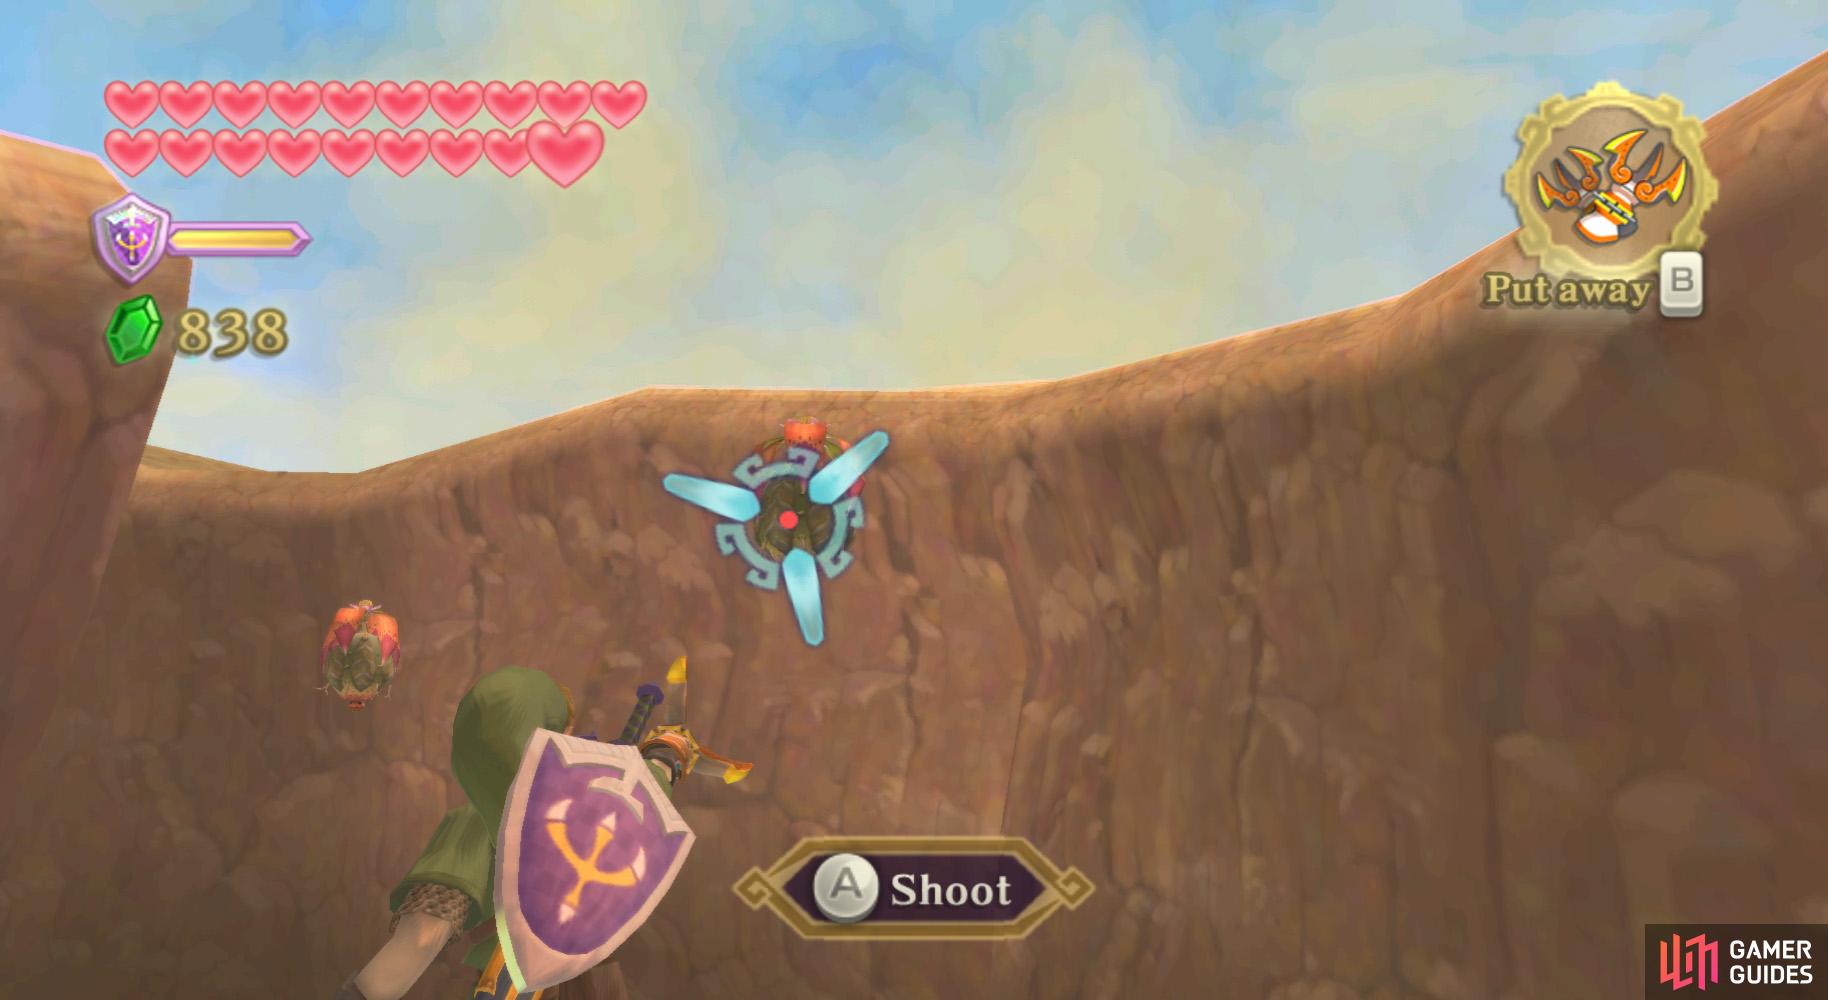 Cross the chasm by firing your Clawshots at the chain of Peahats.